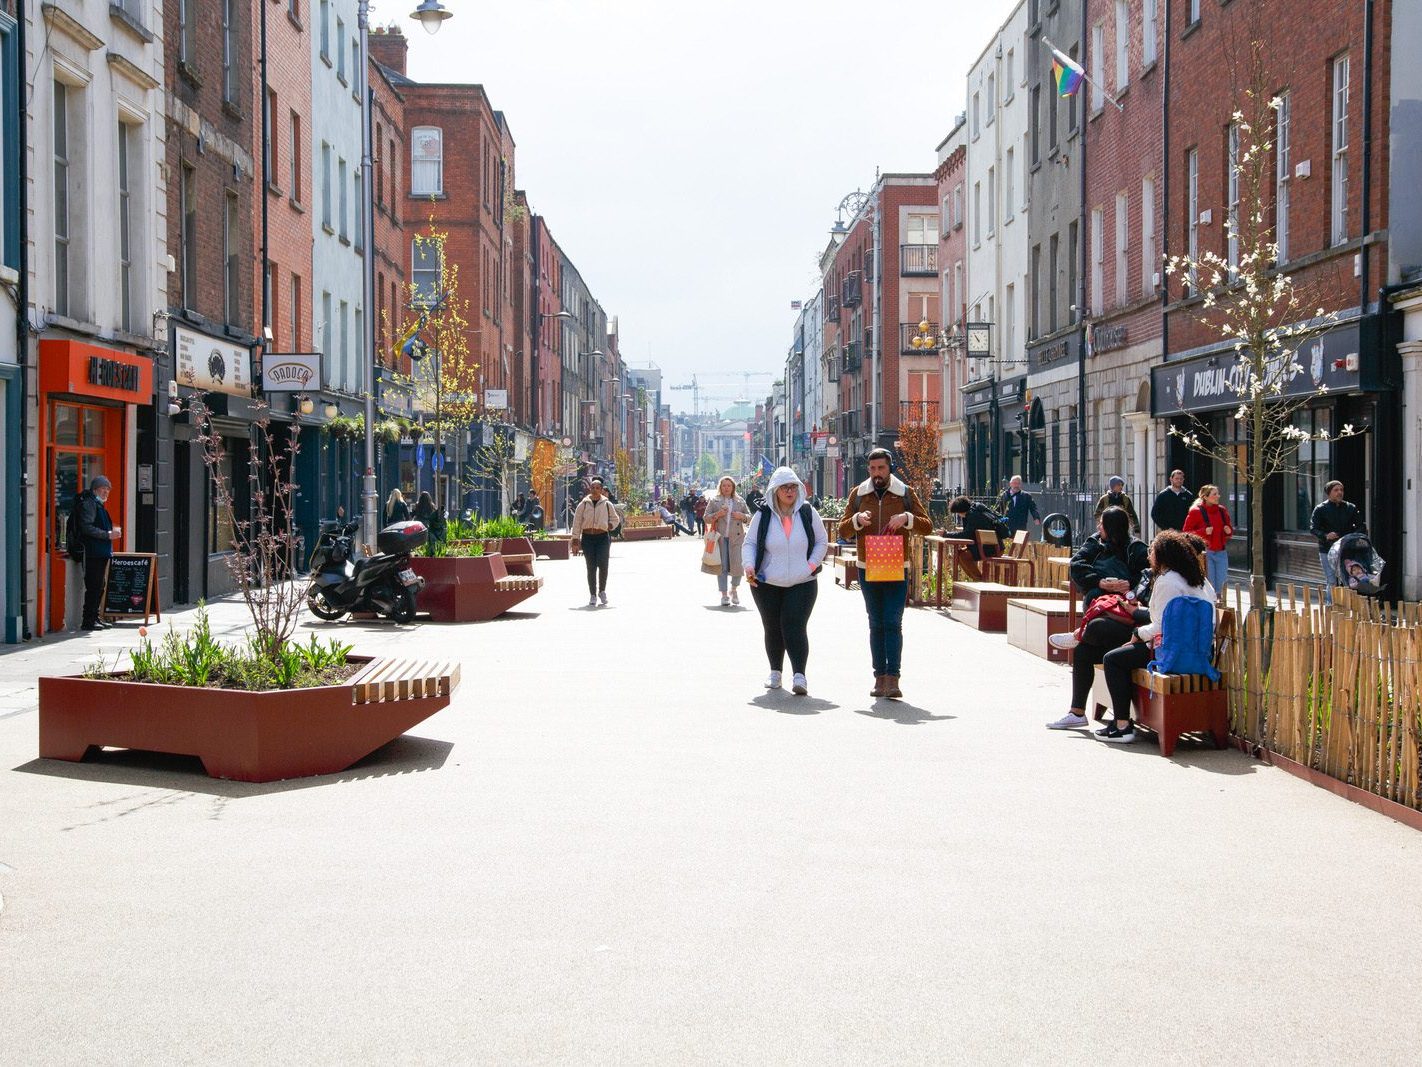 CAPEL STREET [THE RECONFIGURATION WORK HAS BEGUN AT THE LIFFEY END OF THE STREET]-223733-1